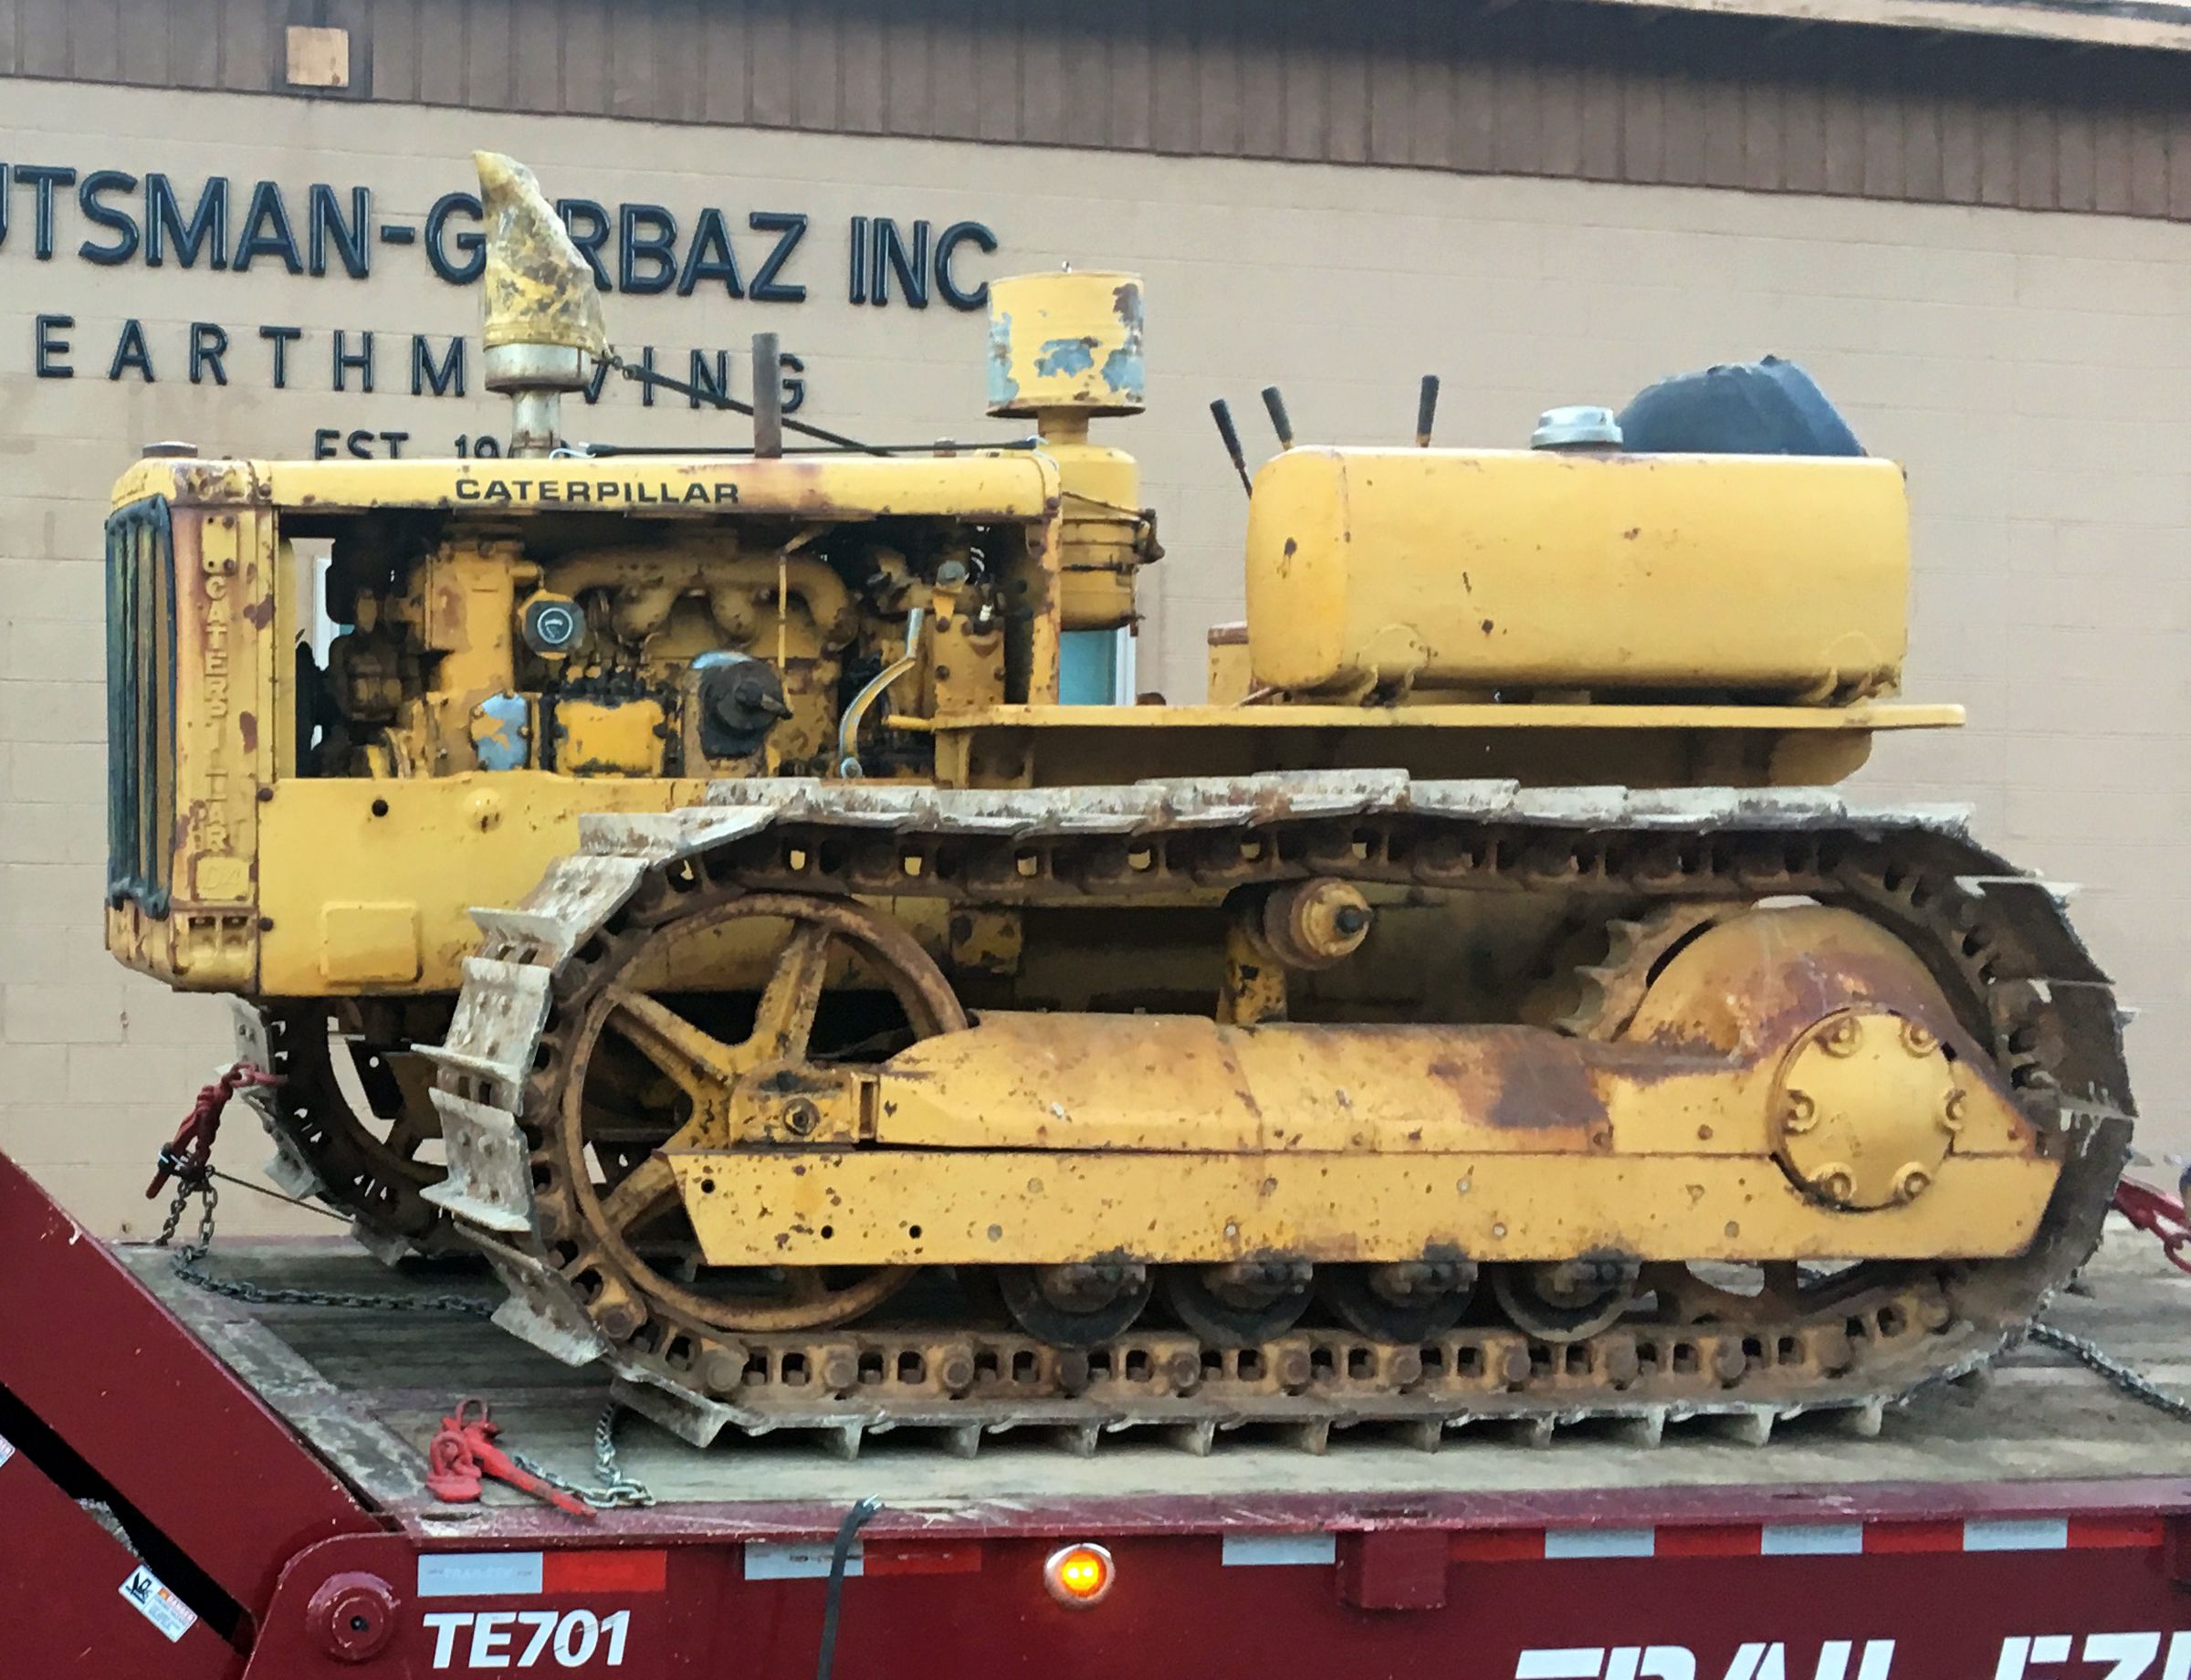 After a global search, Shay Stutsman finally found an antique Cat machine he could restore – a 1949 Cat D4.